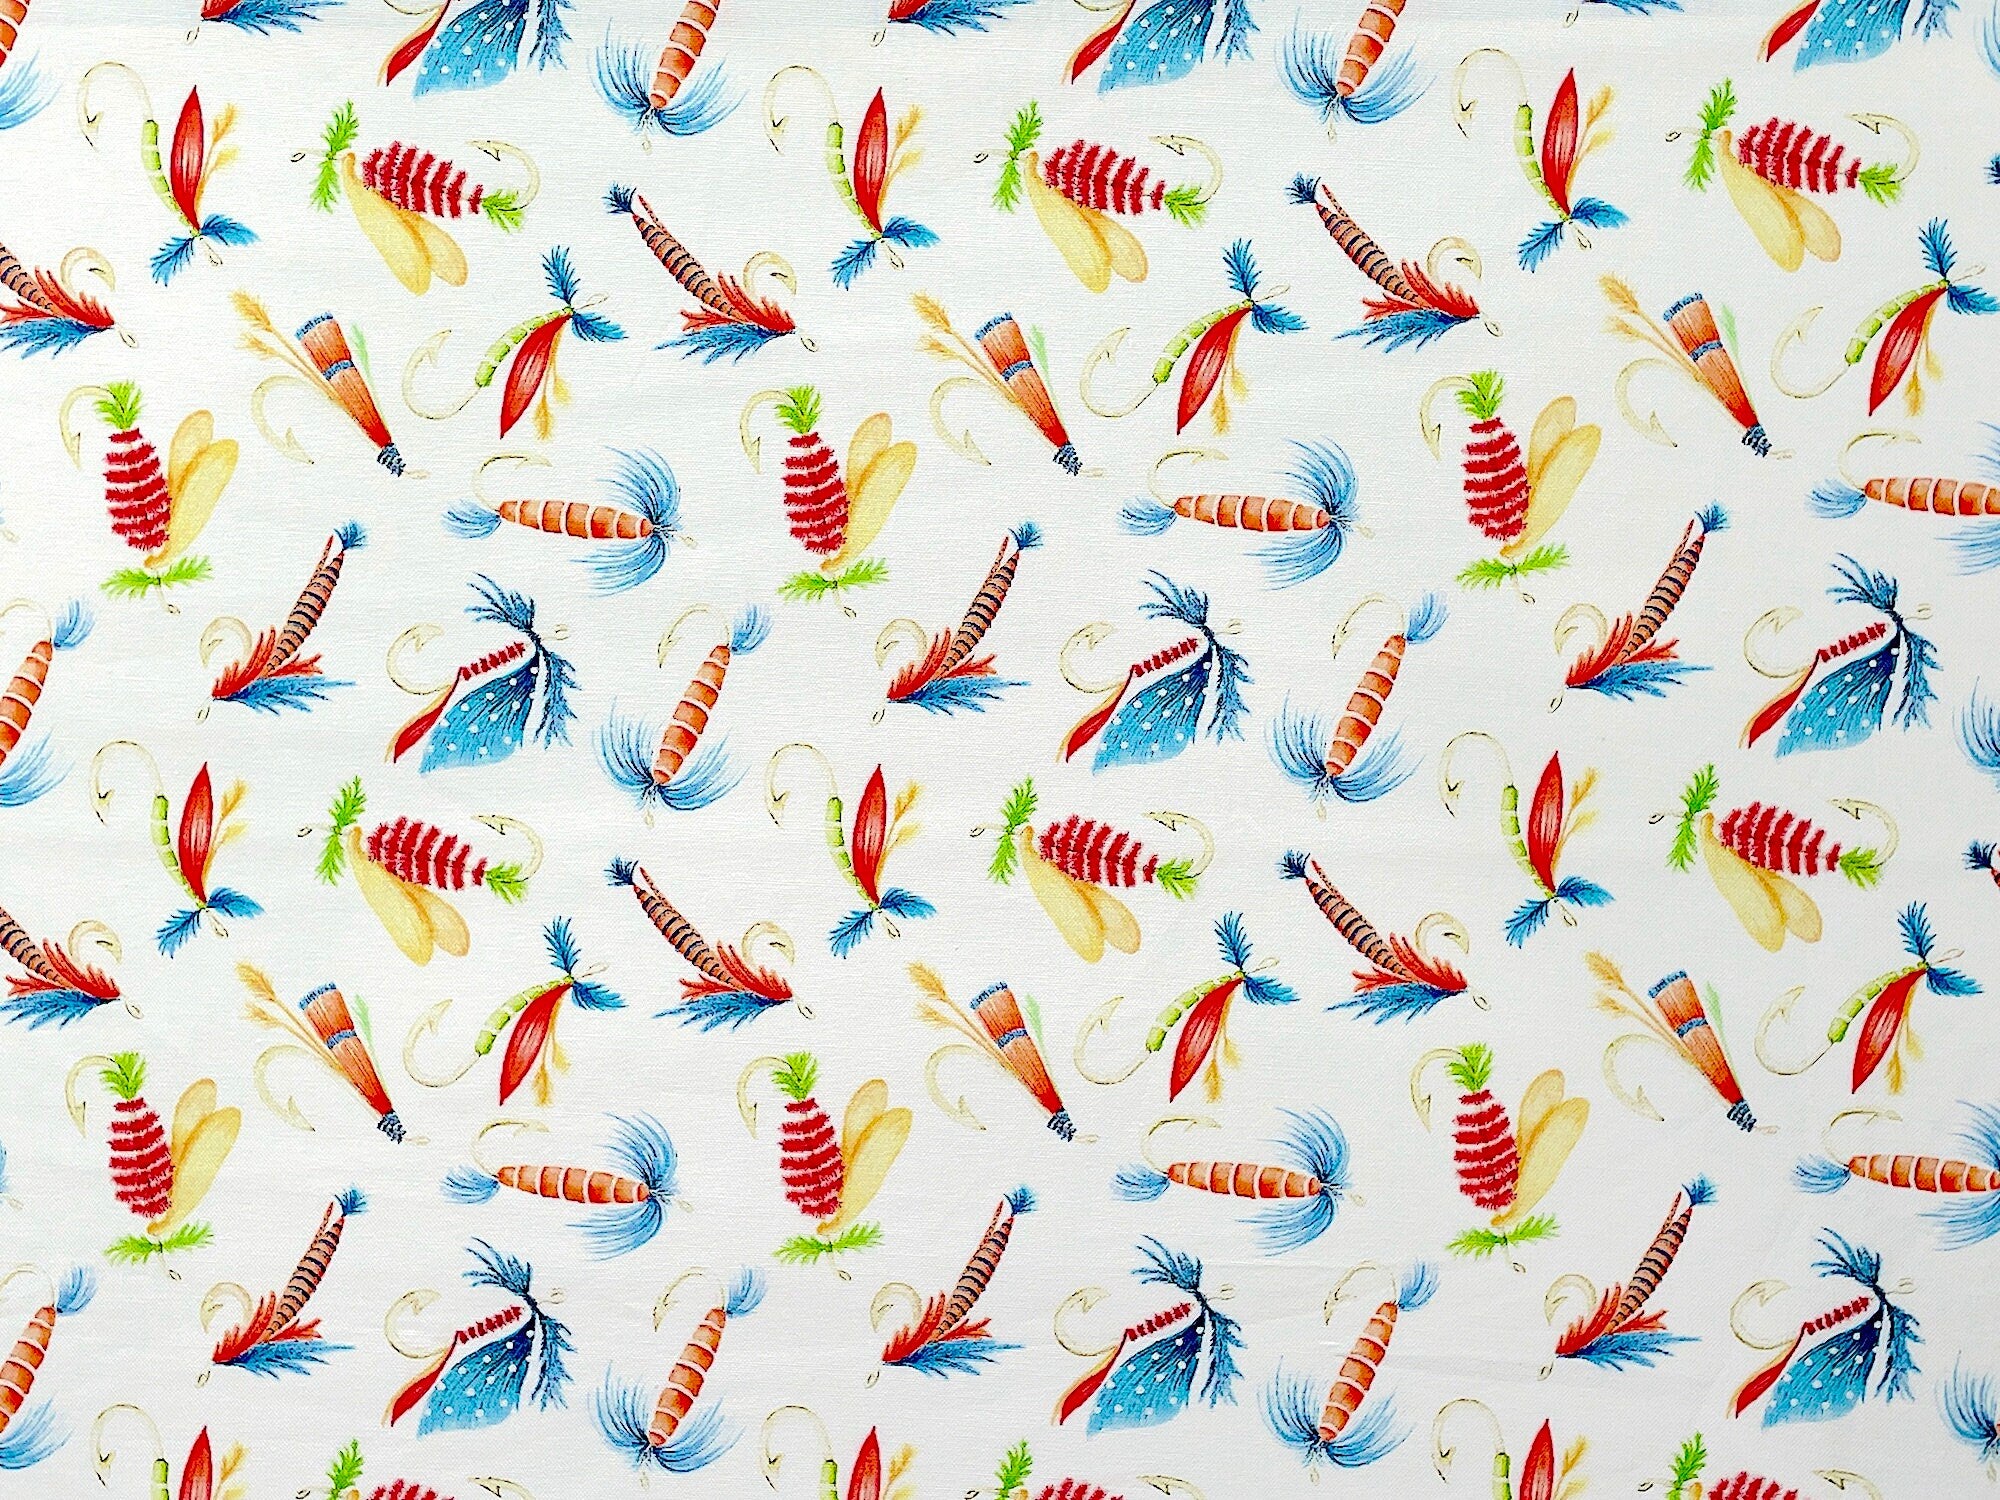 This is a collection of Fly Fishing Lures on a cream background